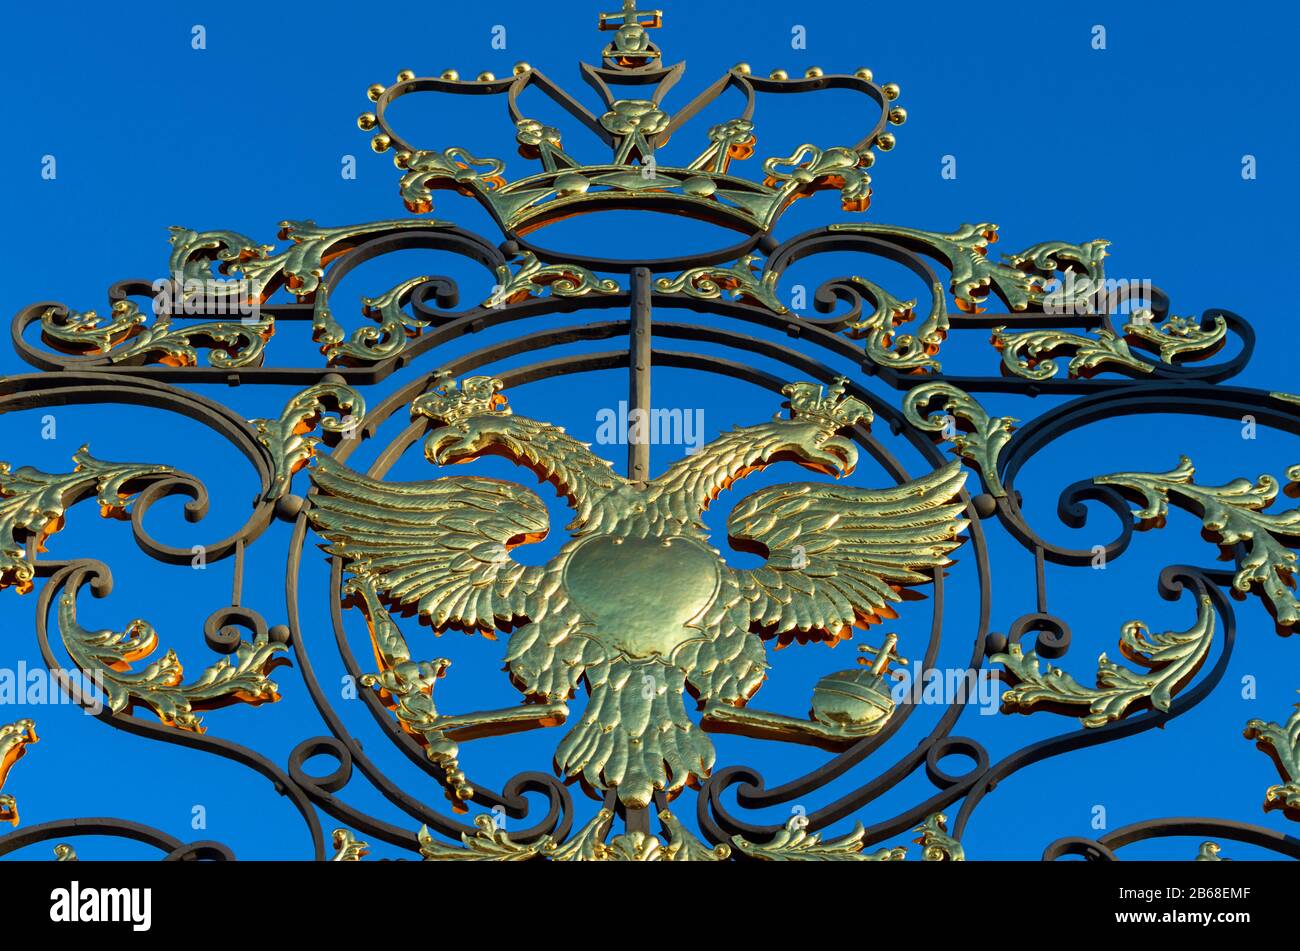 Tsarskoye Selo, Saint Petersburg, Russia - 29 February 2020: Glittering golden double-headed eagle - the coat of arms of Russian Empire and Russian Fe Stock Photo